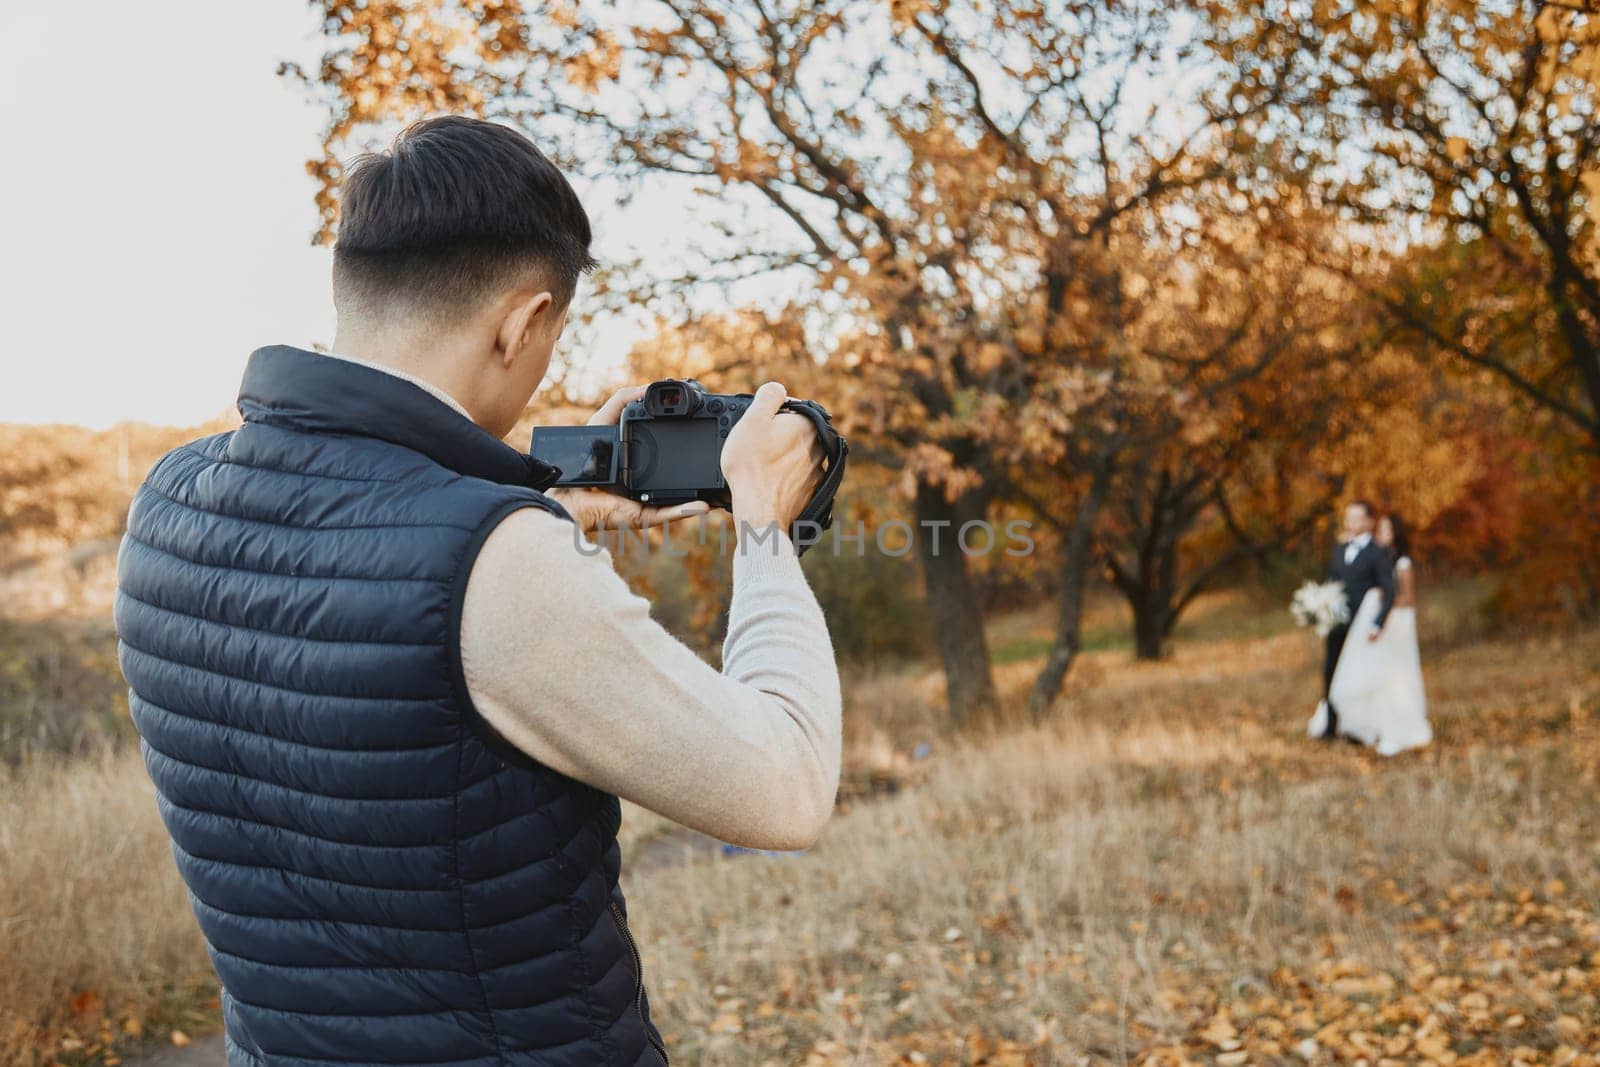 Professional wedding photographer taking pictures of the bride and groom in nature in autumn